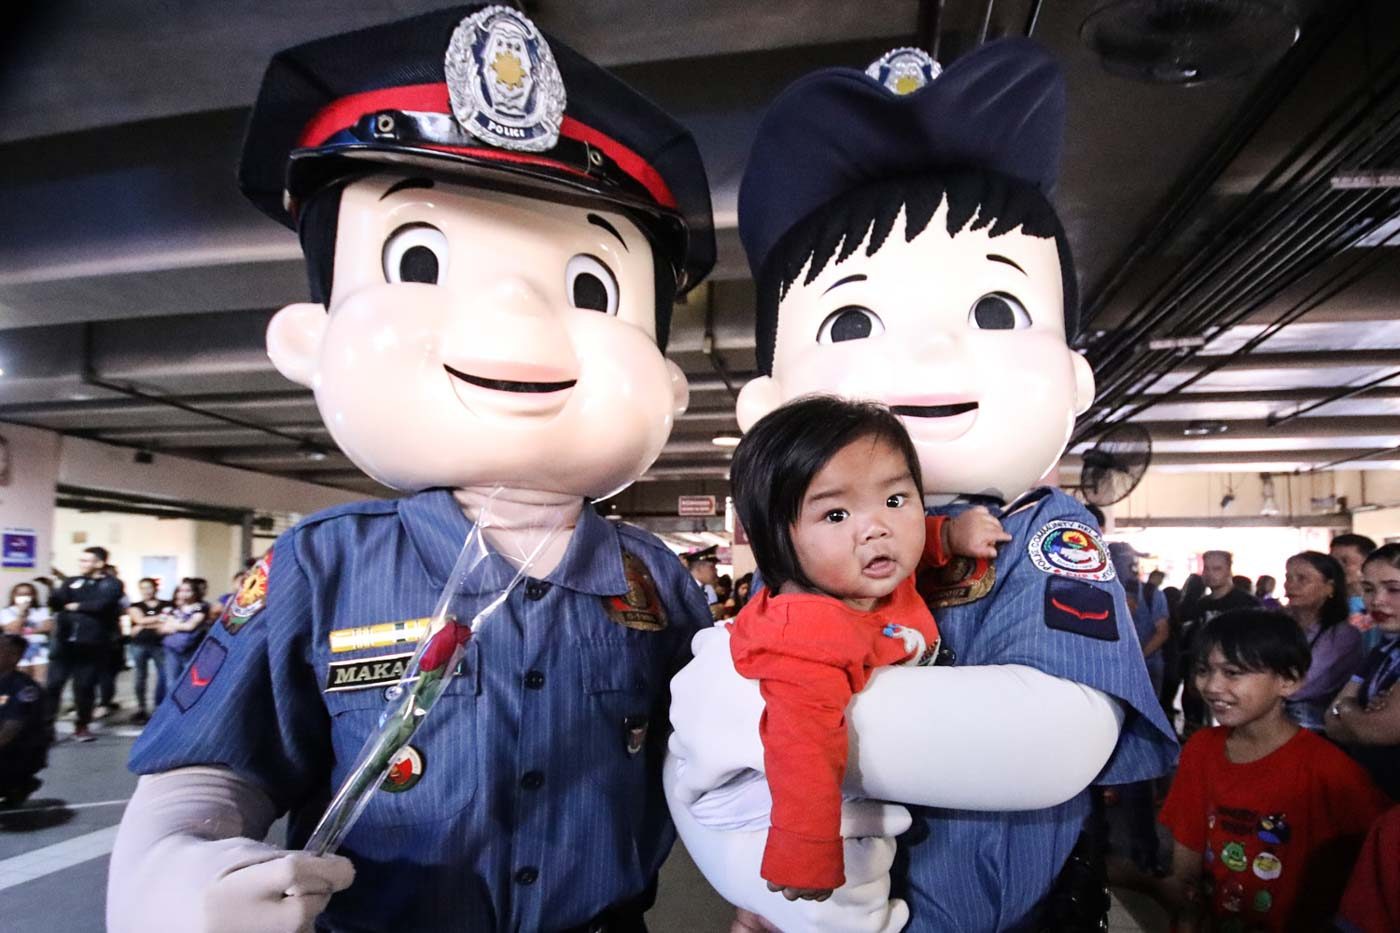 MASCOTS FOR KIDS. The Philippine National Police brings out mascots to surprise kids, too. Photo by Darren Langit/Rappler  